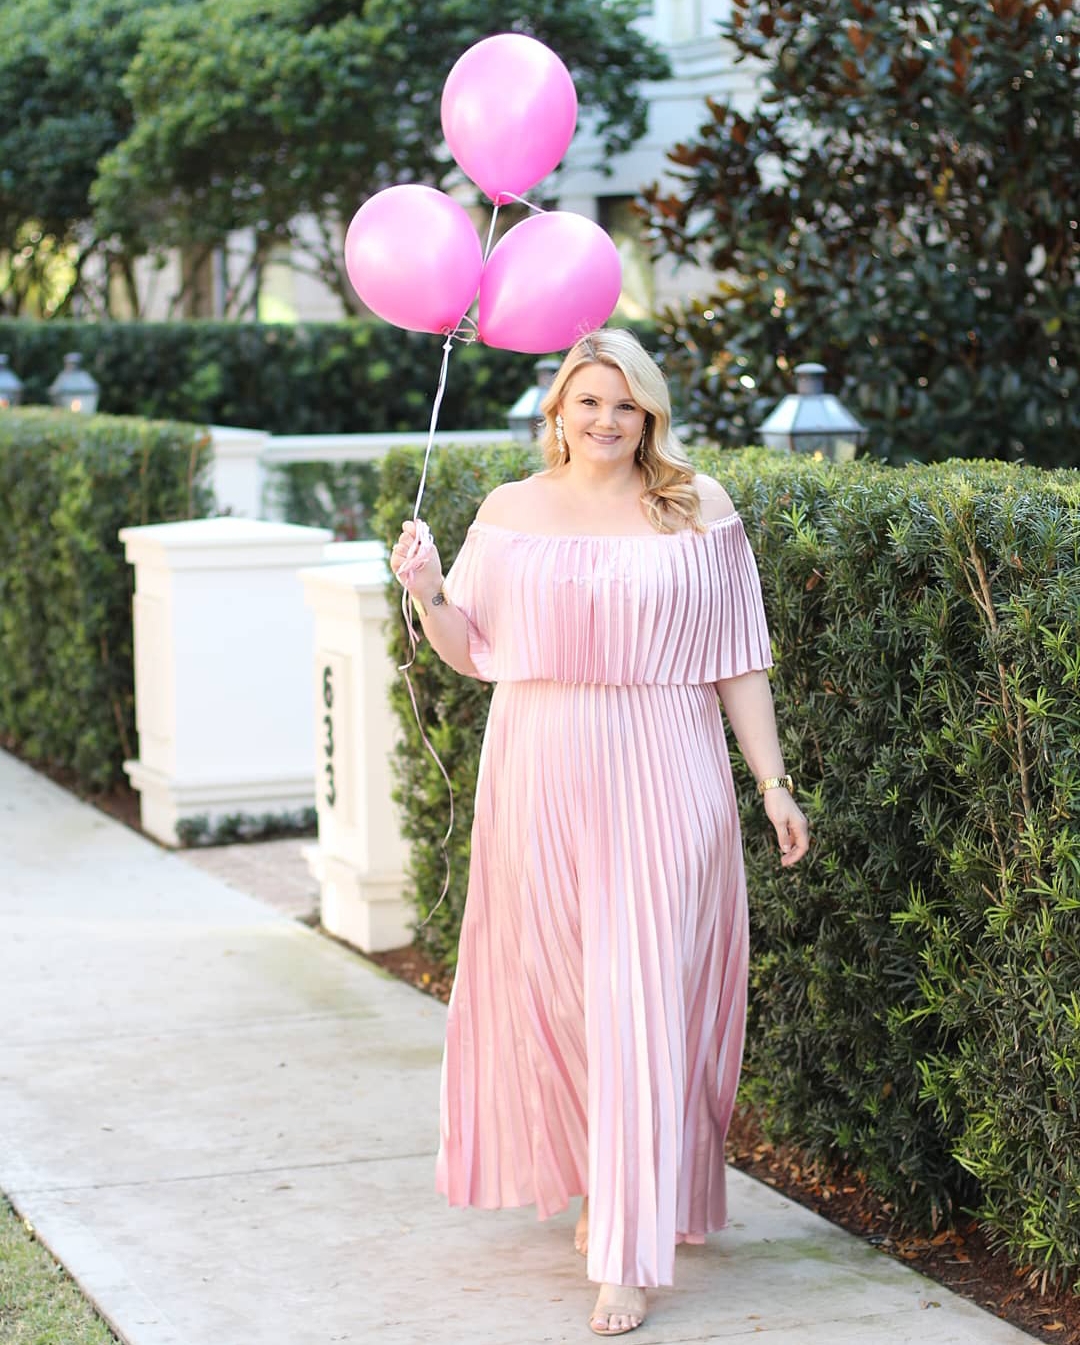 Orlando blogger Emily of Fabulously Overdressed shares 5 fun facts about herself and has a beauty giveaway for her 3rd blogiversary